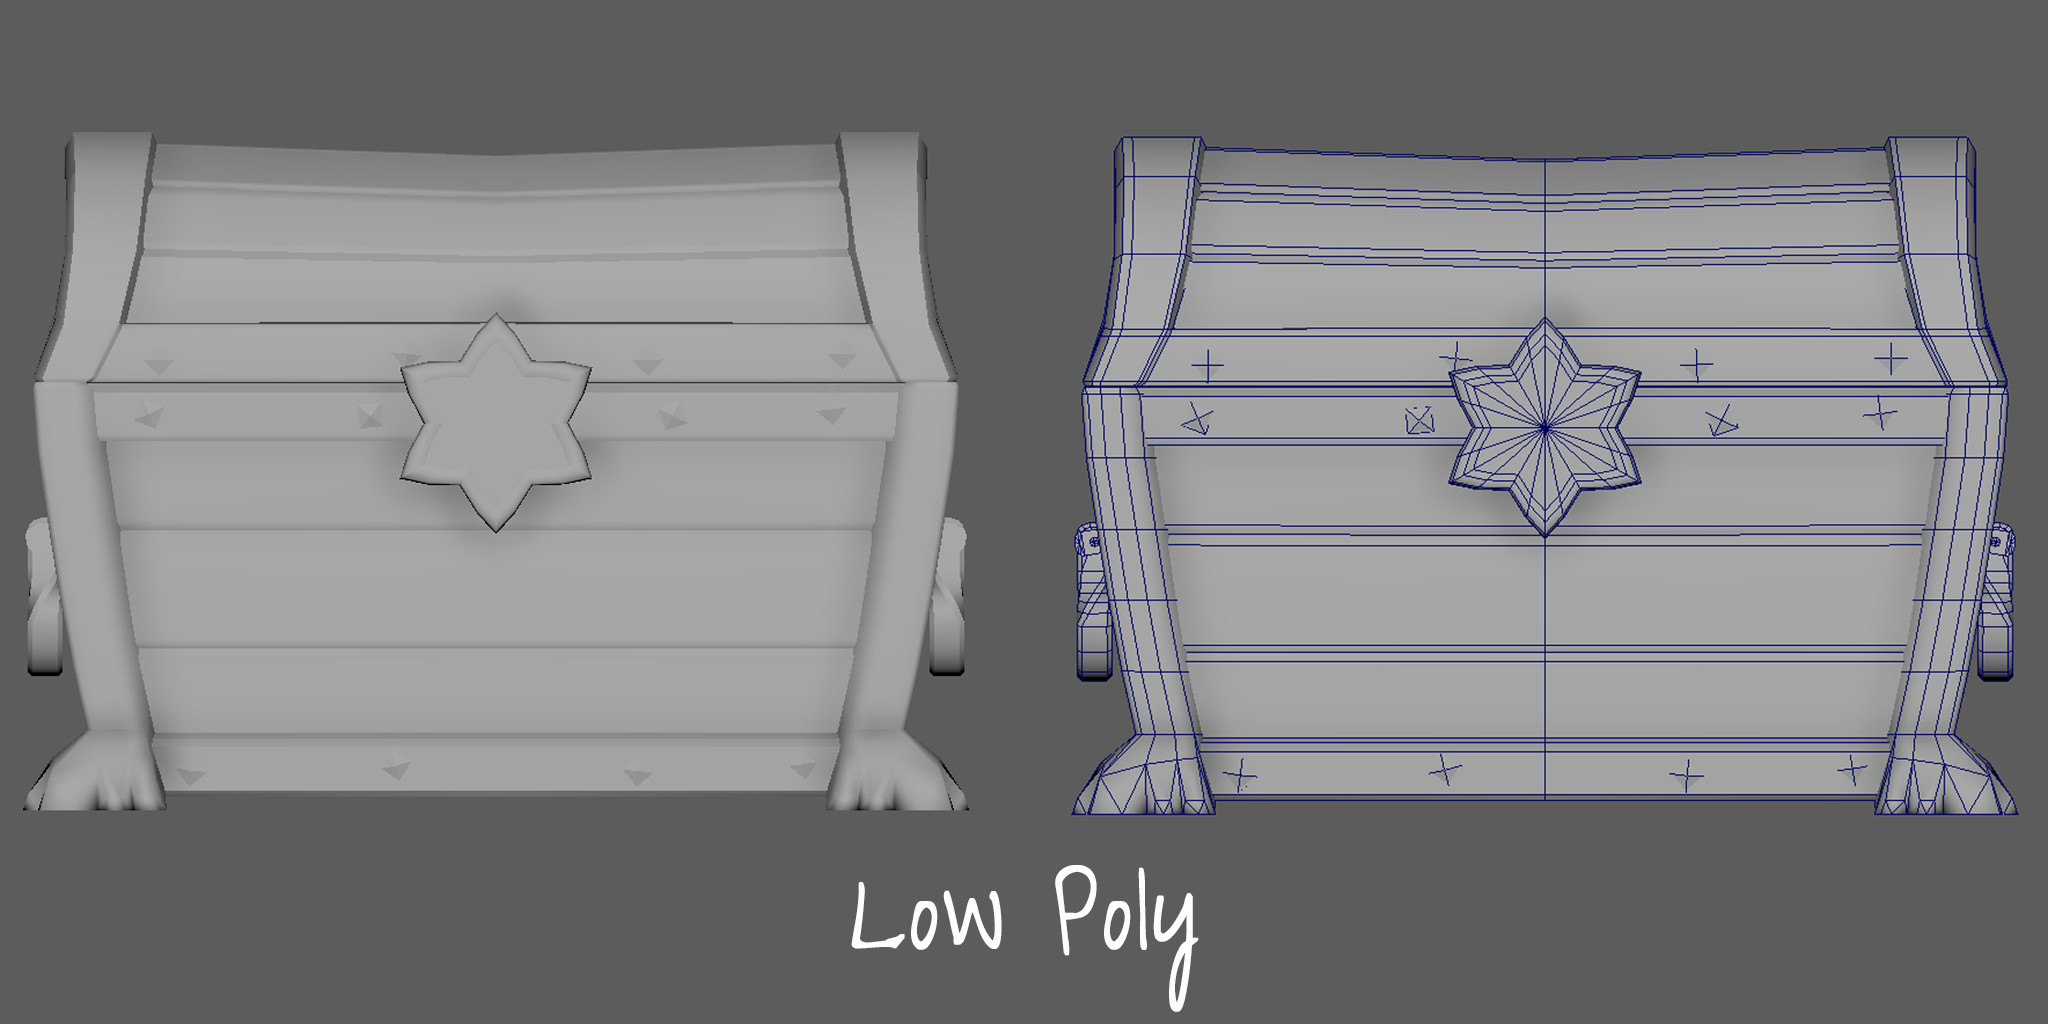 An example of my workflow, featuring my favorite prop from the scene. Low poly blockout and wireframe, in Maya.